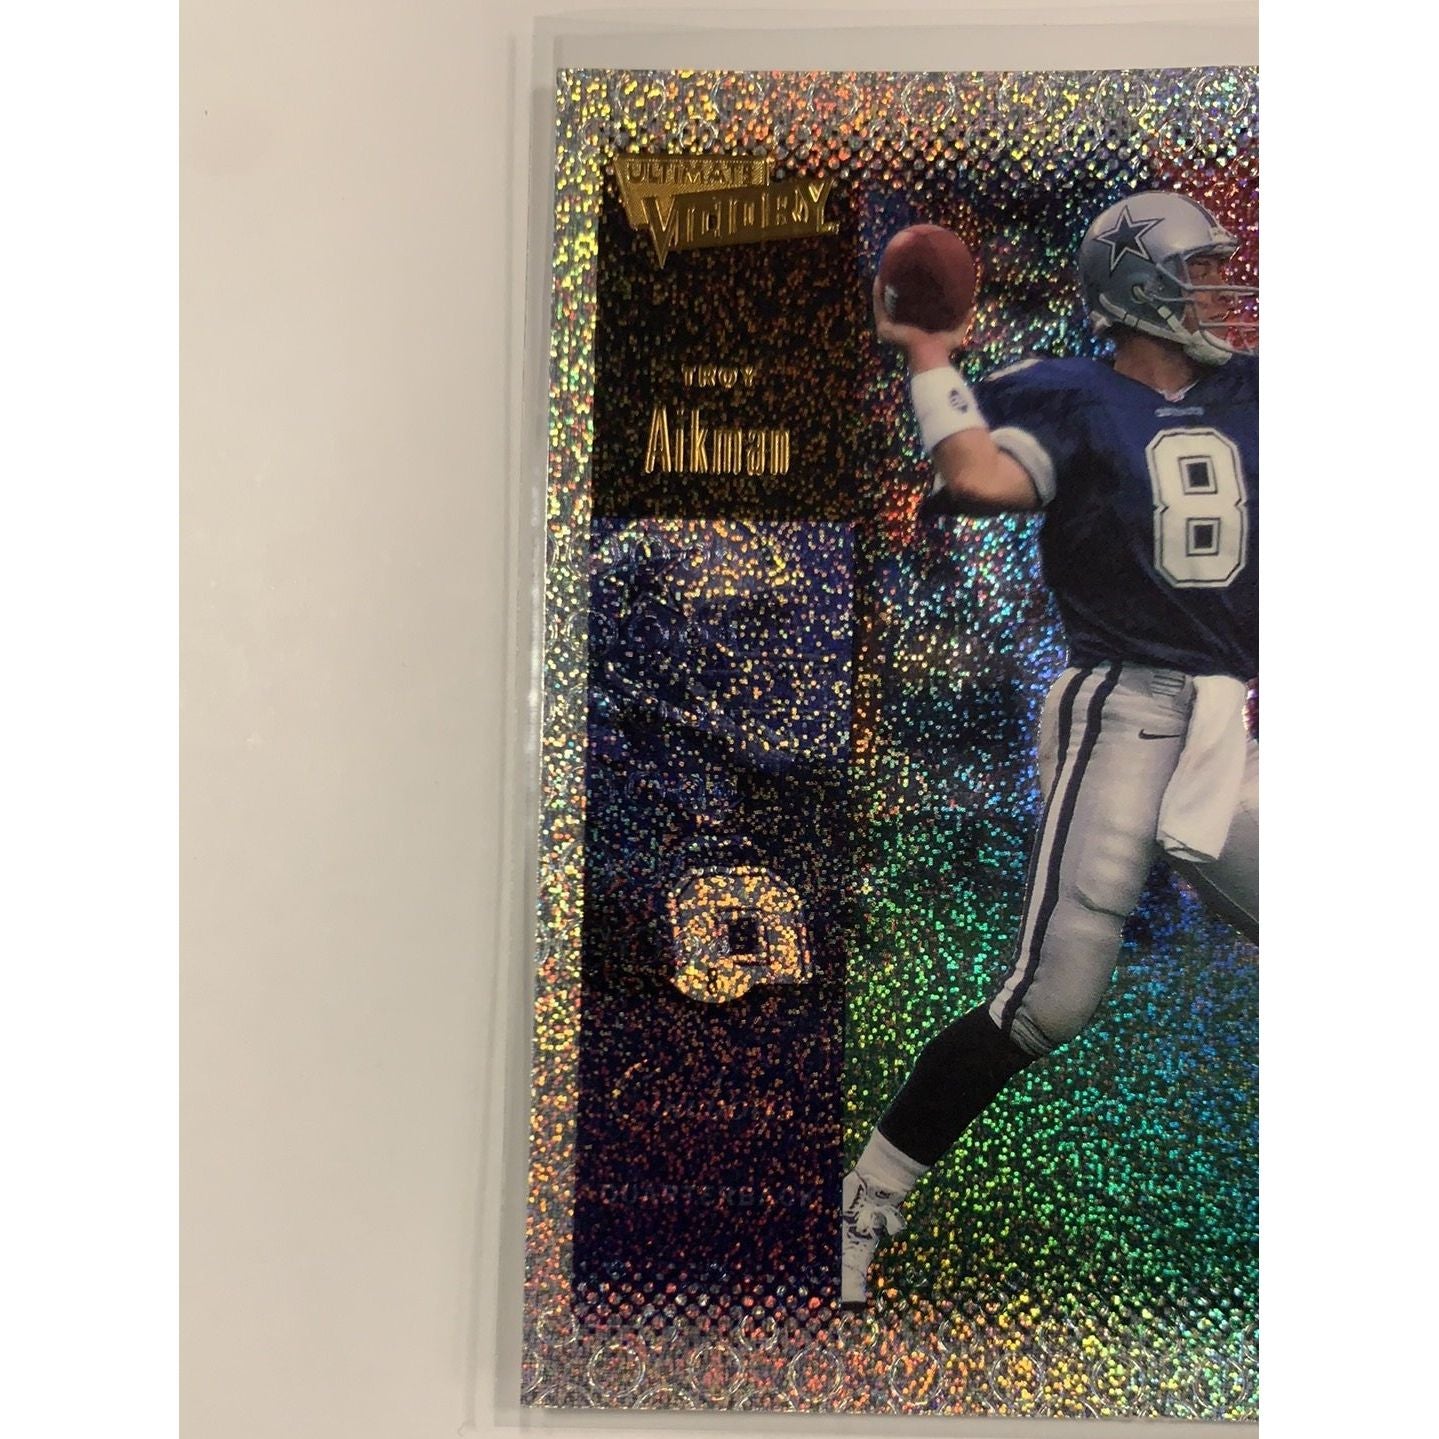  2000 Upper Deck Victory Troy Aikman Speckle Foil Parallel  Local Legends Cards & Collectibles